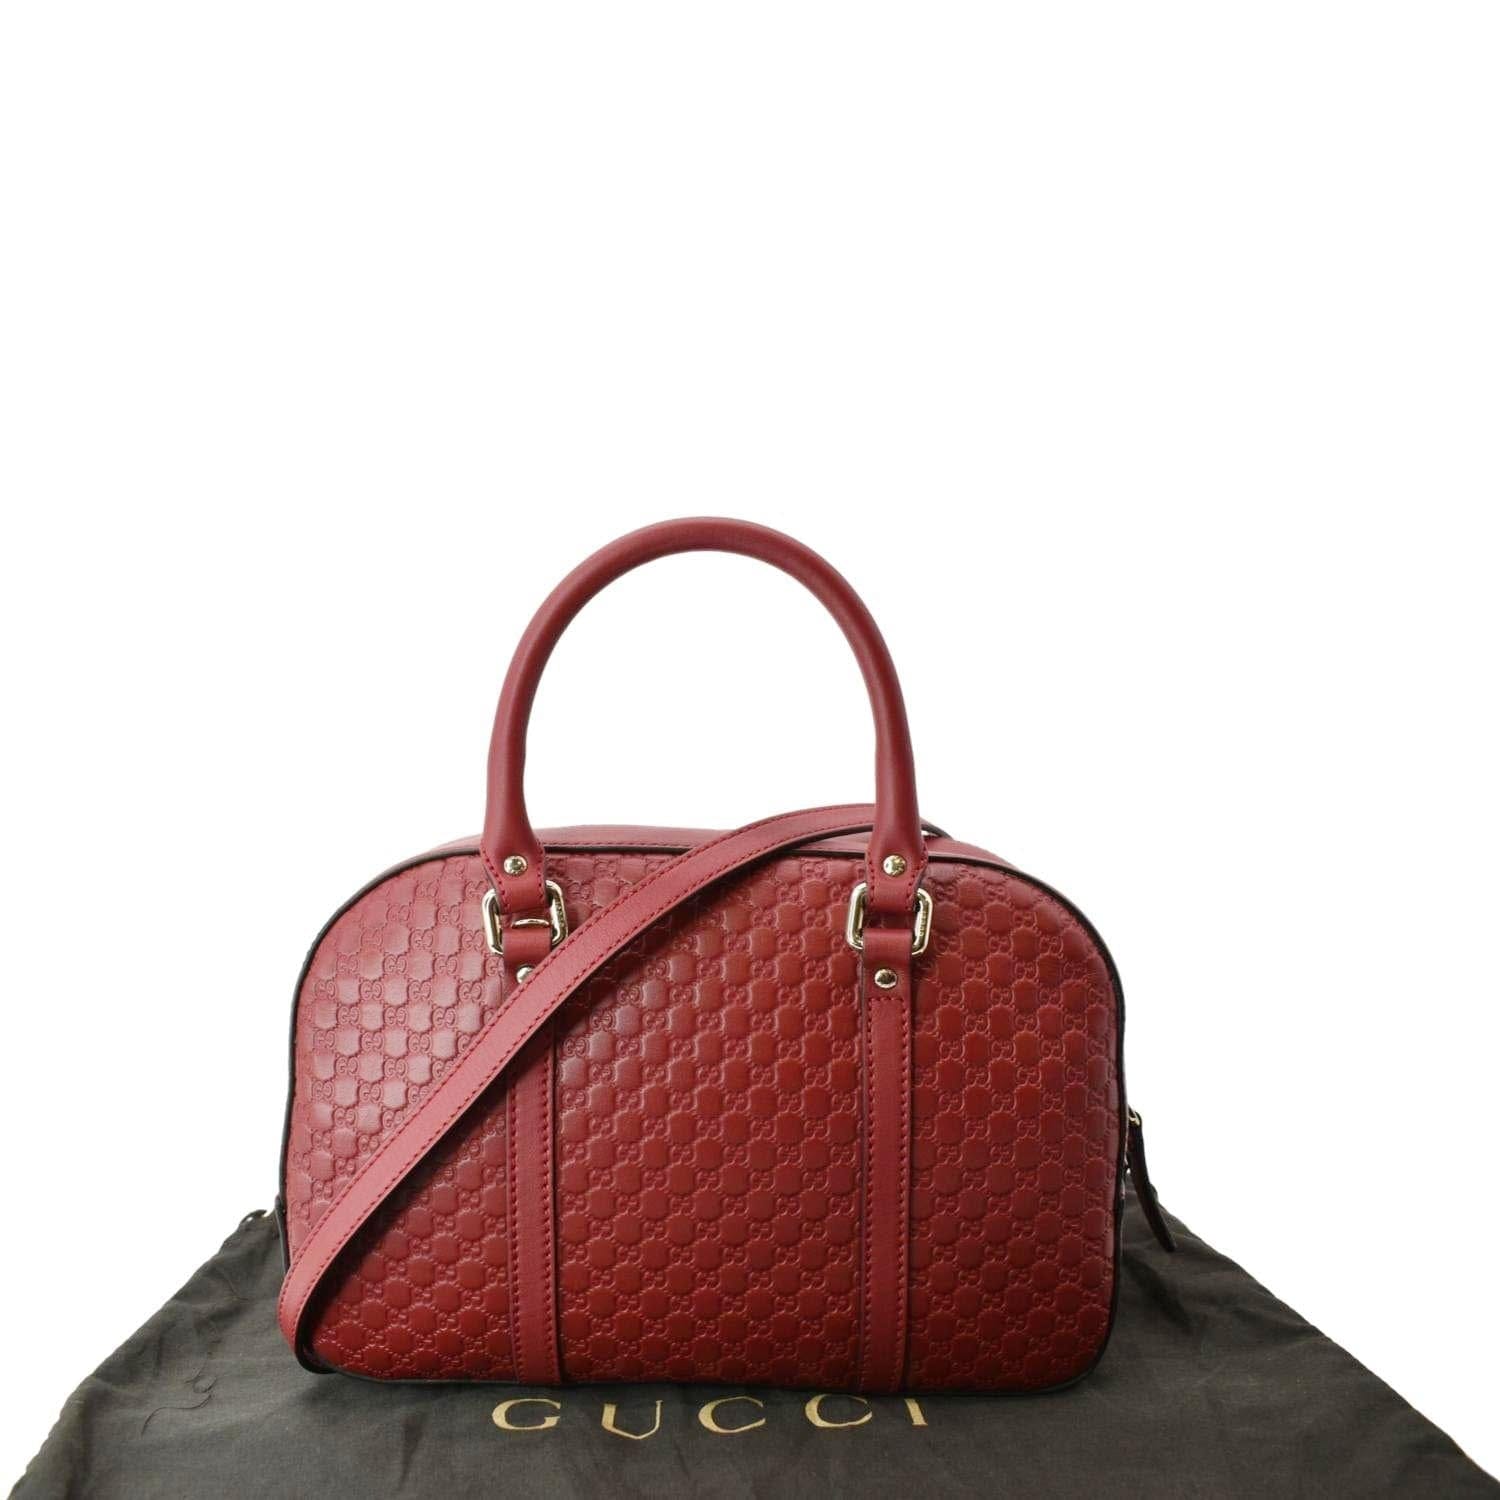 Gucci Microguccissima Small Leather Crossbody Bag Navy Red 510286